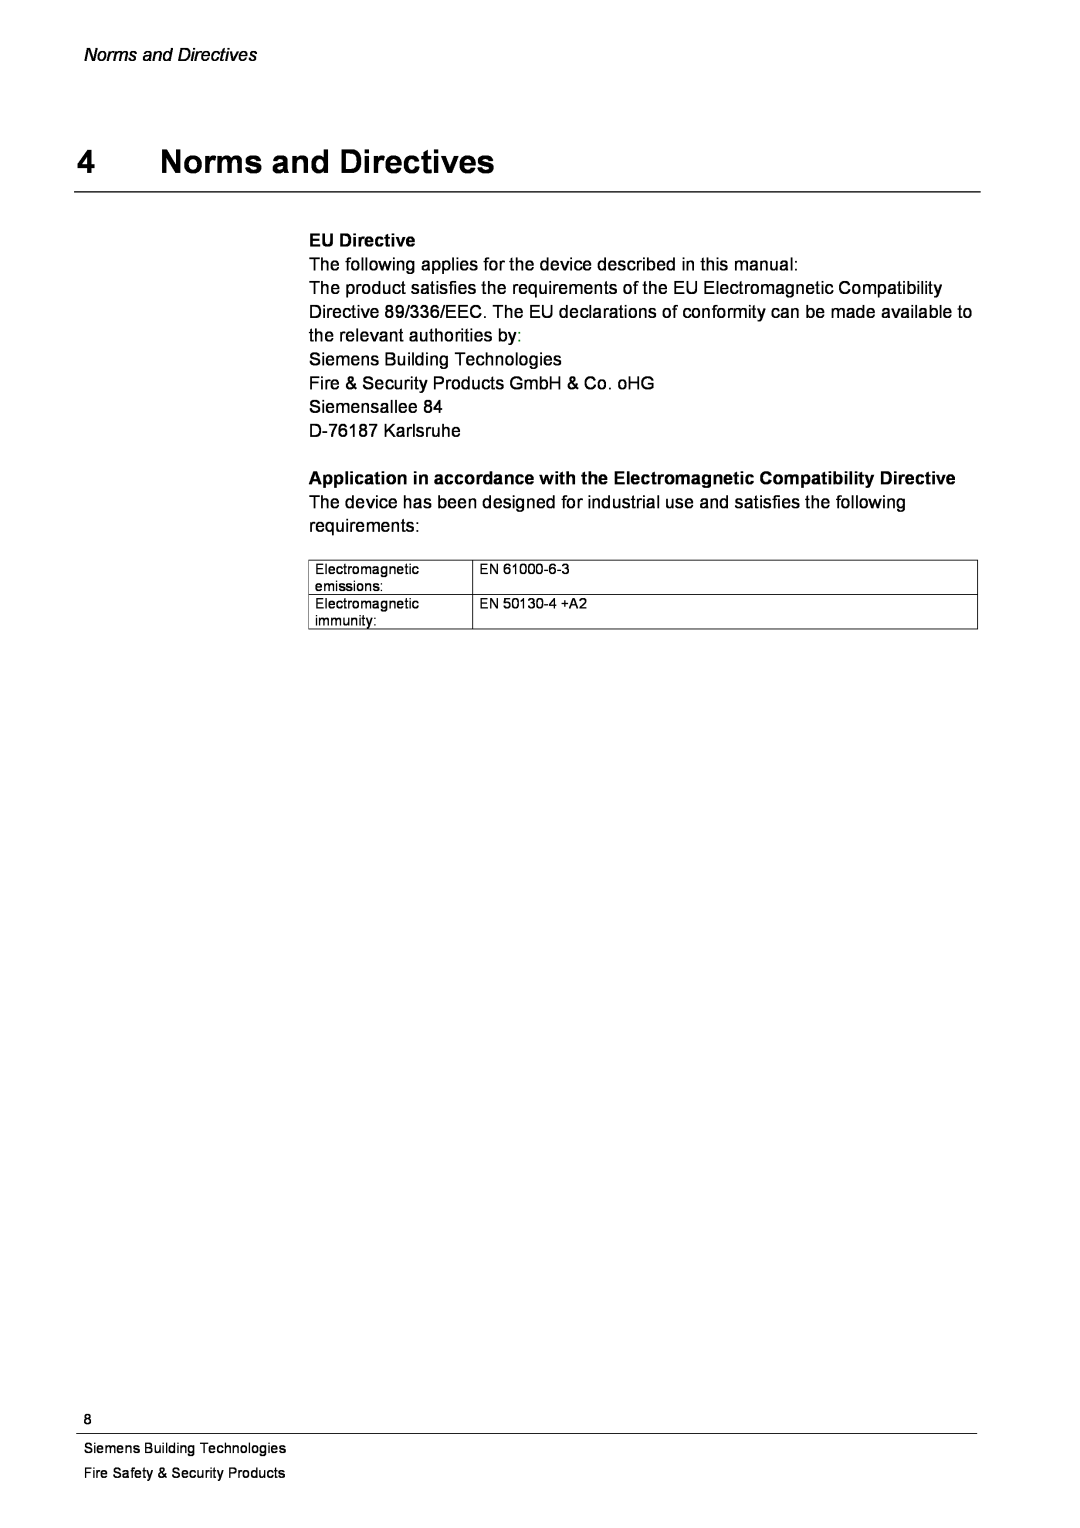 Siemens CFVA-IP user manual Norms and Directives, EU Directive 